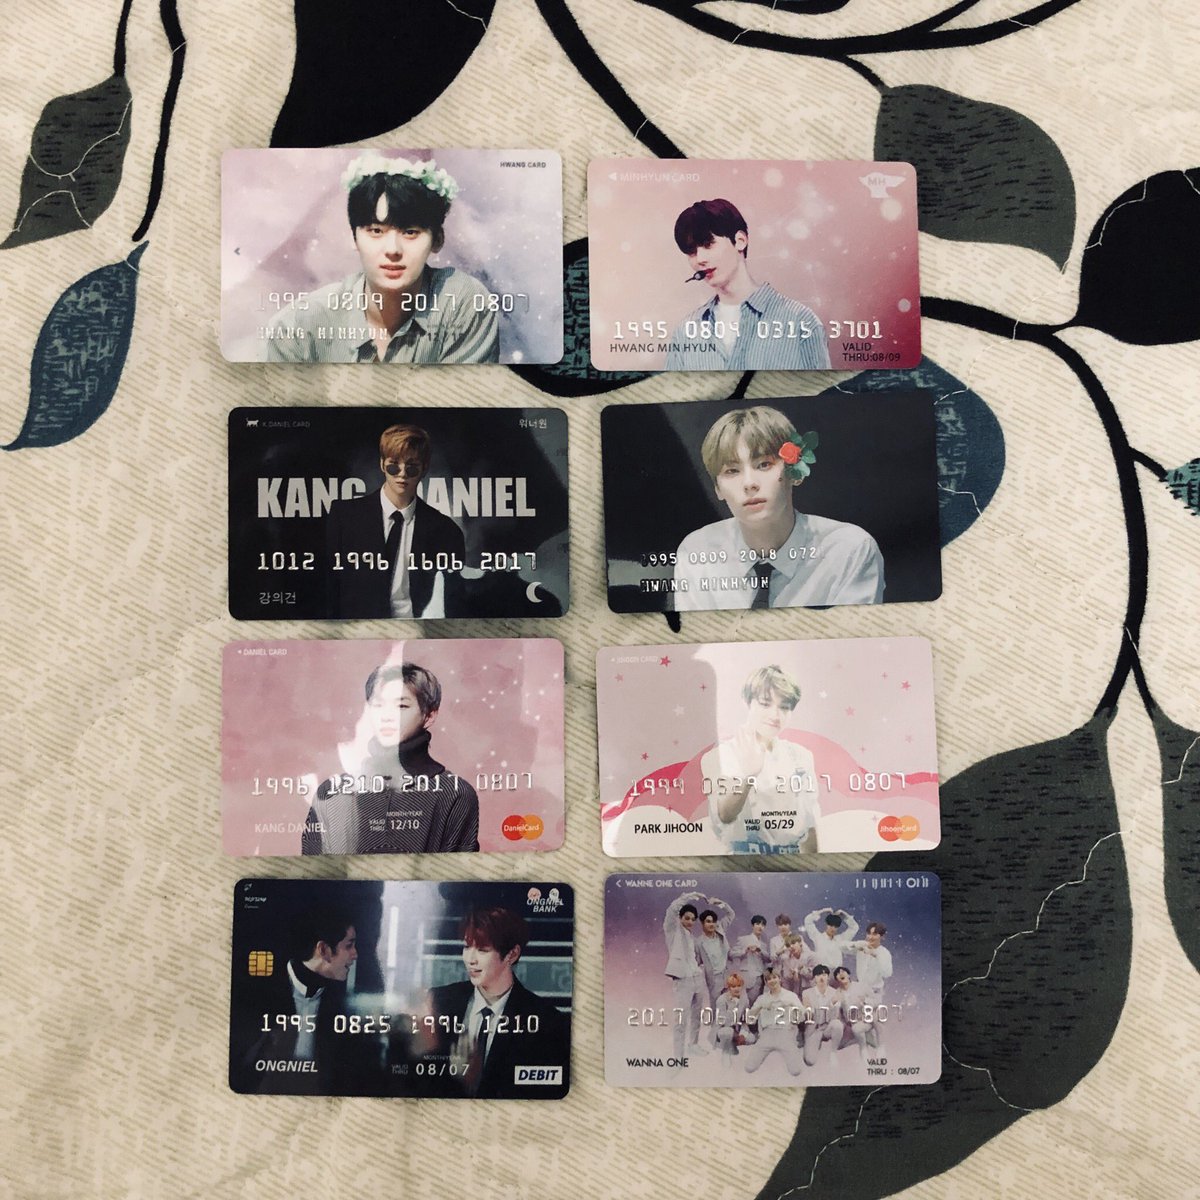 thank you so much for everyone who gave me these~♡ theyre all so pretty, i will treasure them♡ thank you for the organizers for doing the cafe events as well, i had so much fun with my friends♡ wanna one always makes me happy haha #LDMVforONGNIEL 
#forever_9699 #BEFORETOMORROW